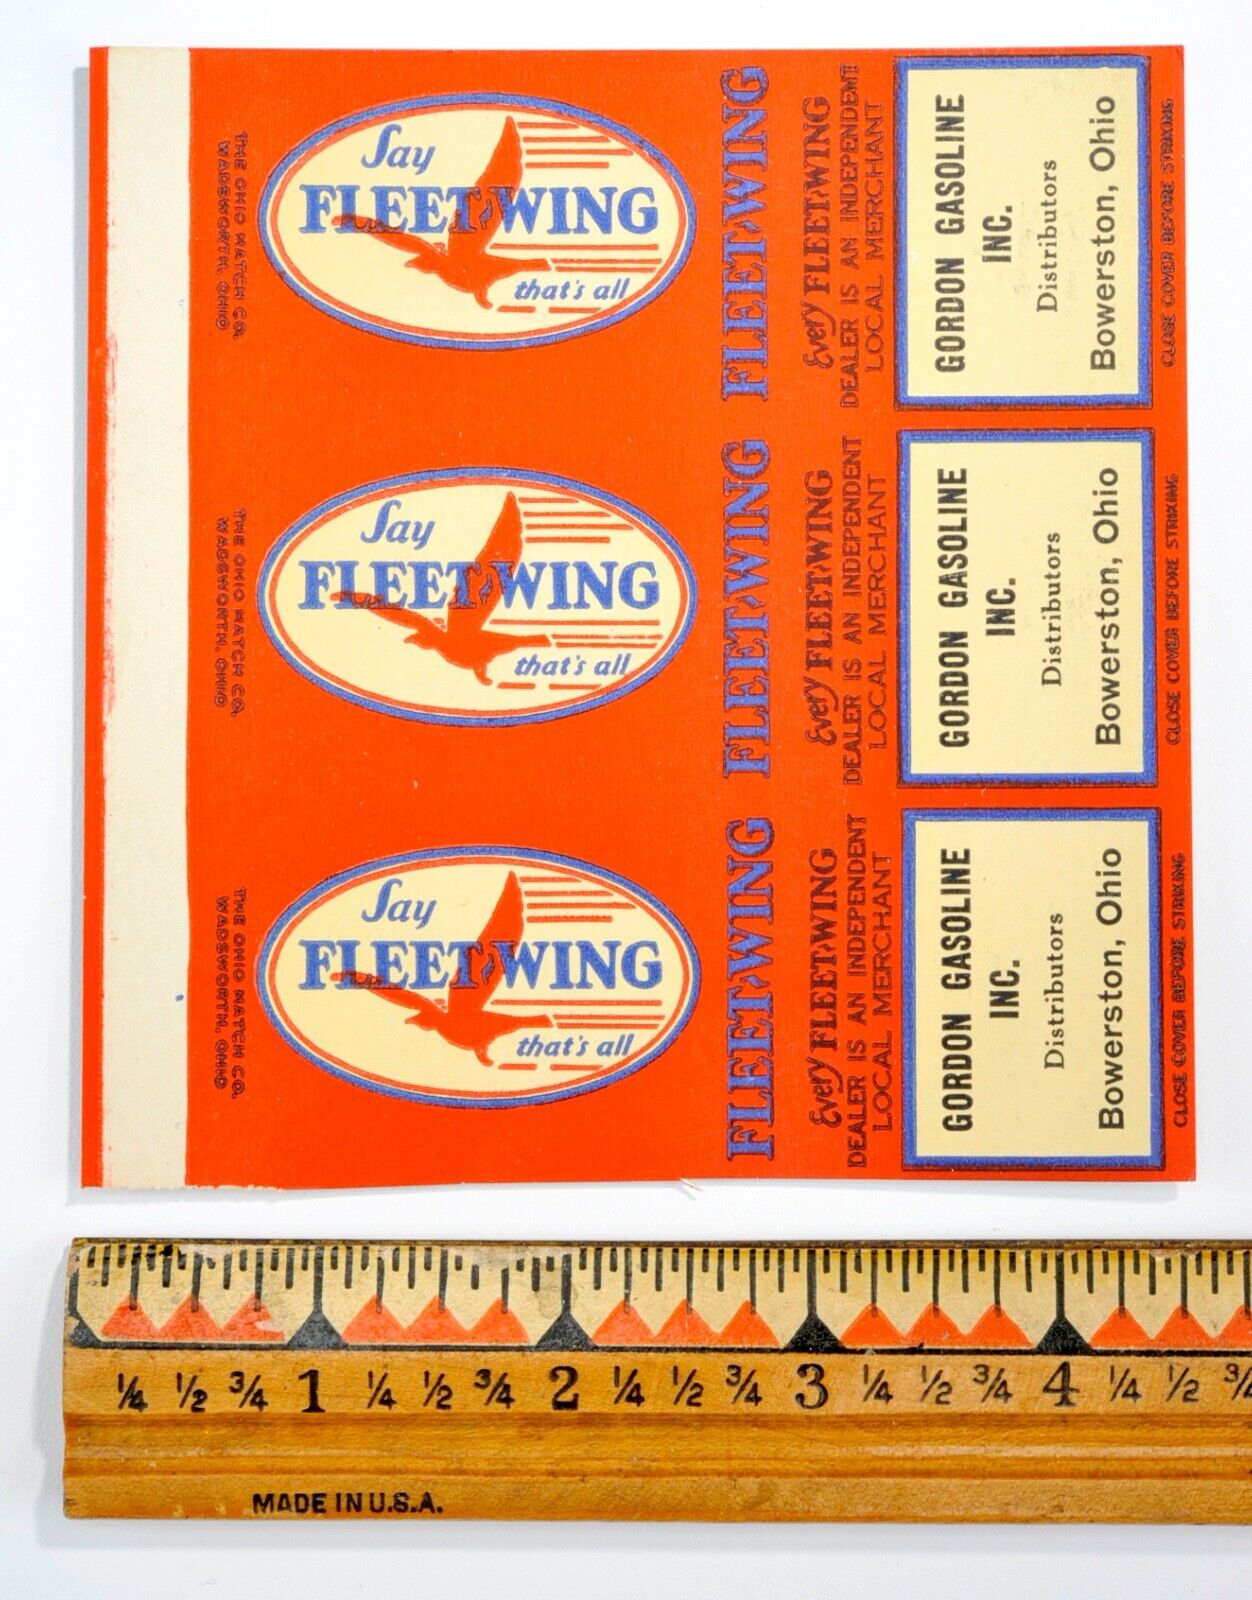 Vintage 1930's Say Fleet Wing Oil Advertising Matchbook Cover Bowerston, Ohio#20